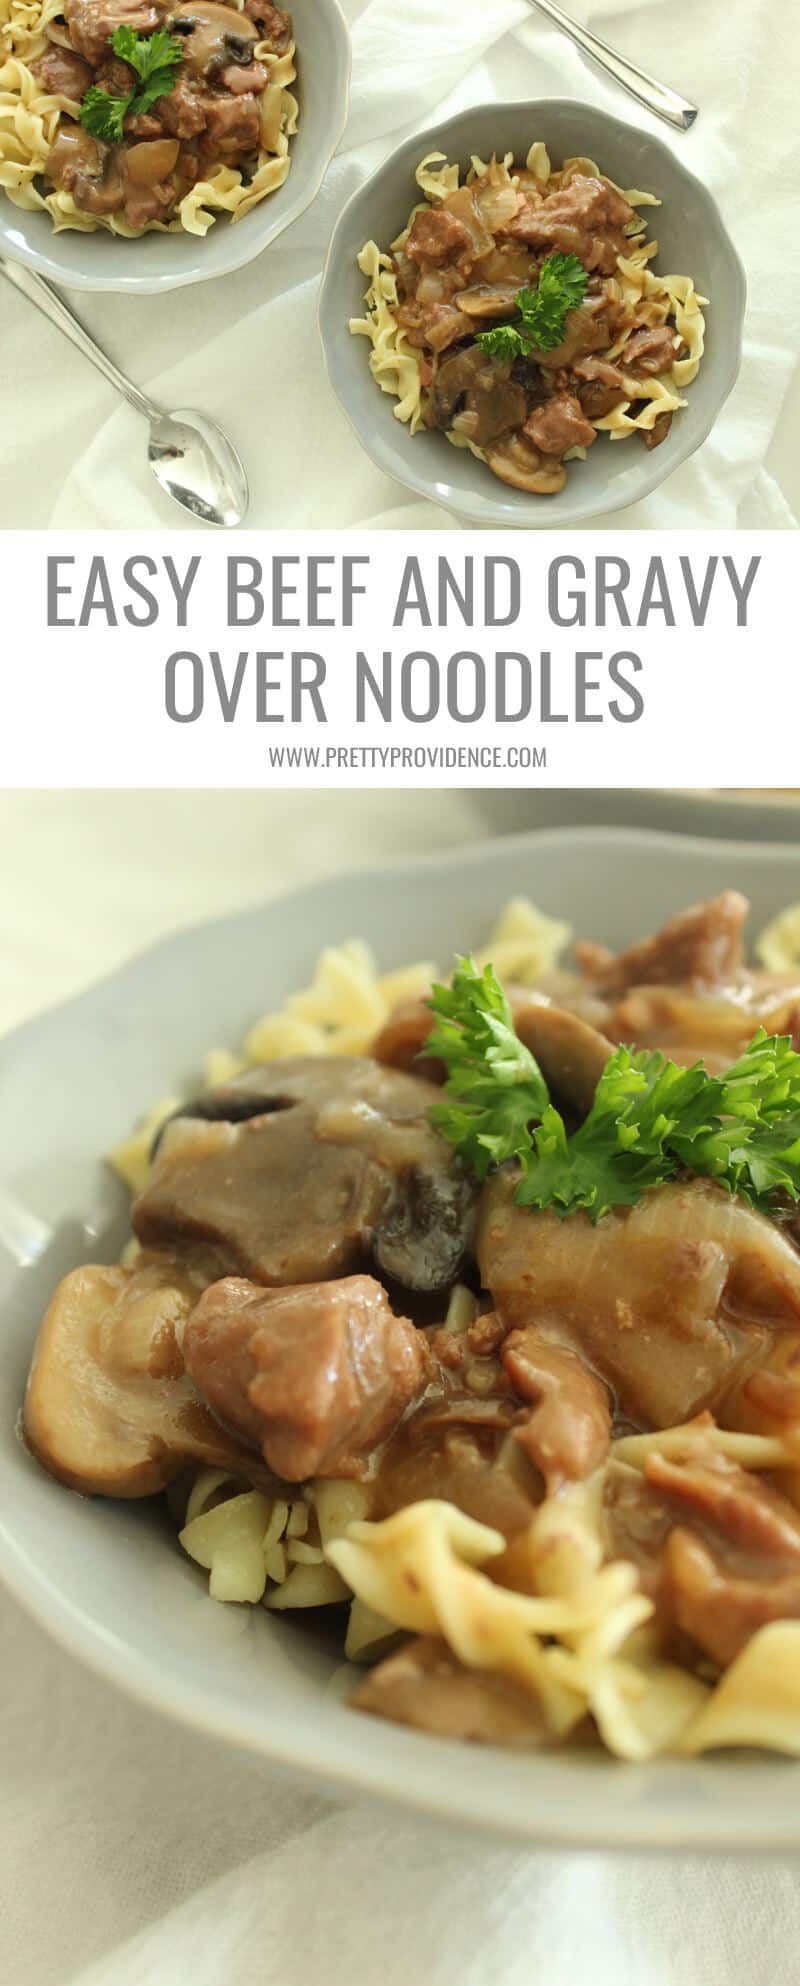 Easy beef and gravy over noodles is the PERFECT hearty weeknight meal when you are on a budget! The crock pot tenderizes the cheaper cuts of meat and by the time its done it is fall apart tender! One of our favorite family meals! 